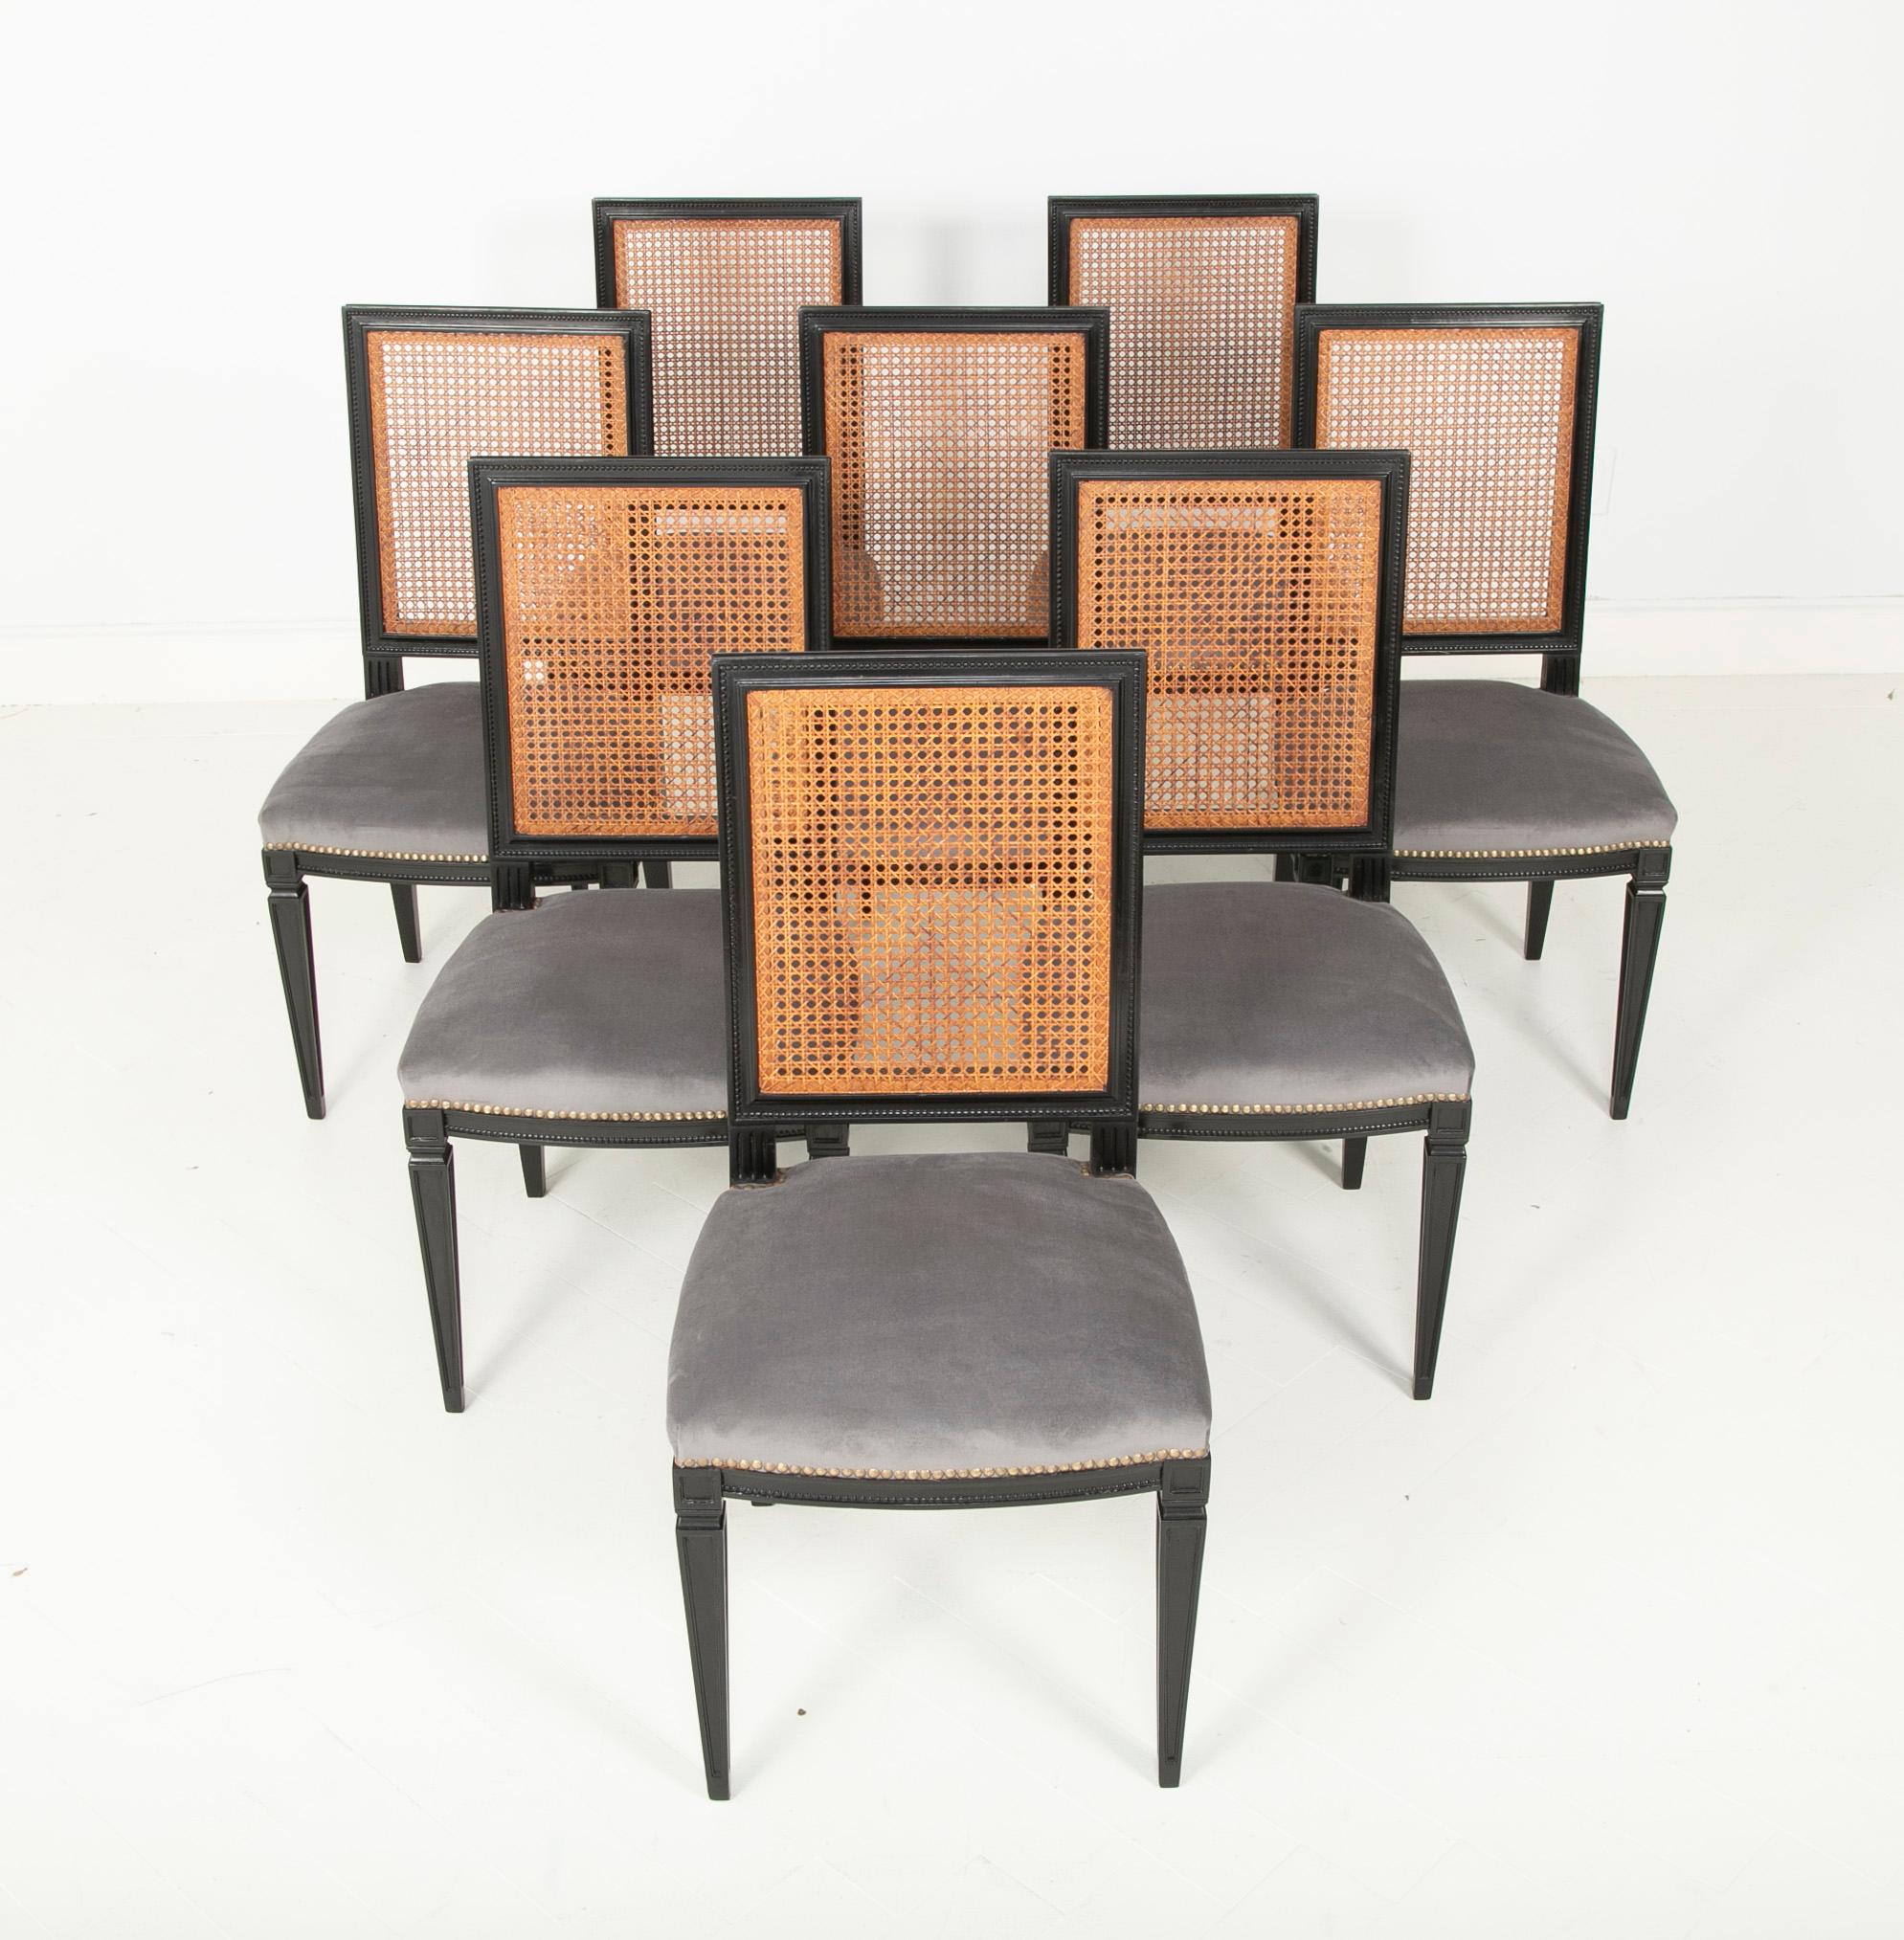 An ebonized set of 8 dining chairs with caned backs in blue/grey upholstery.